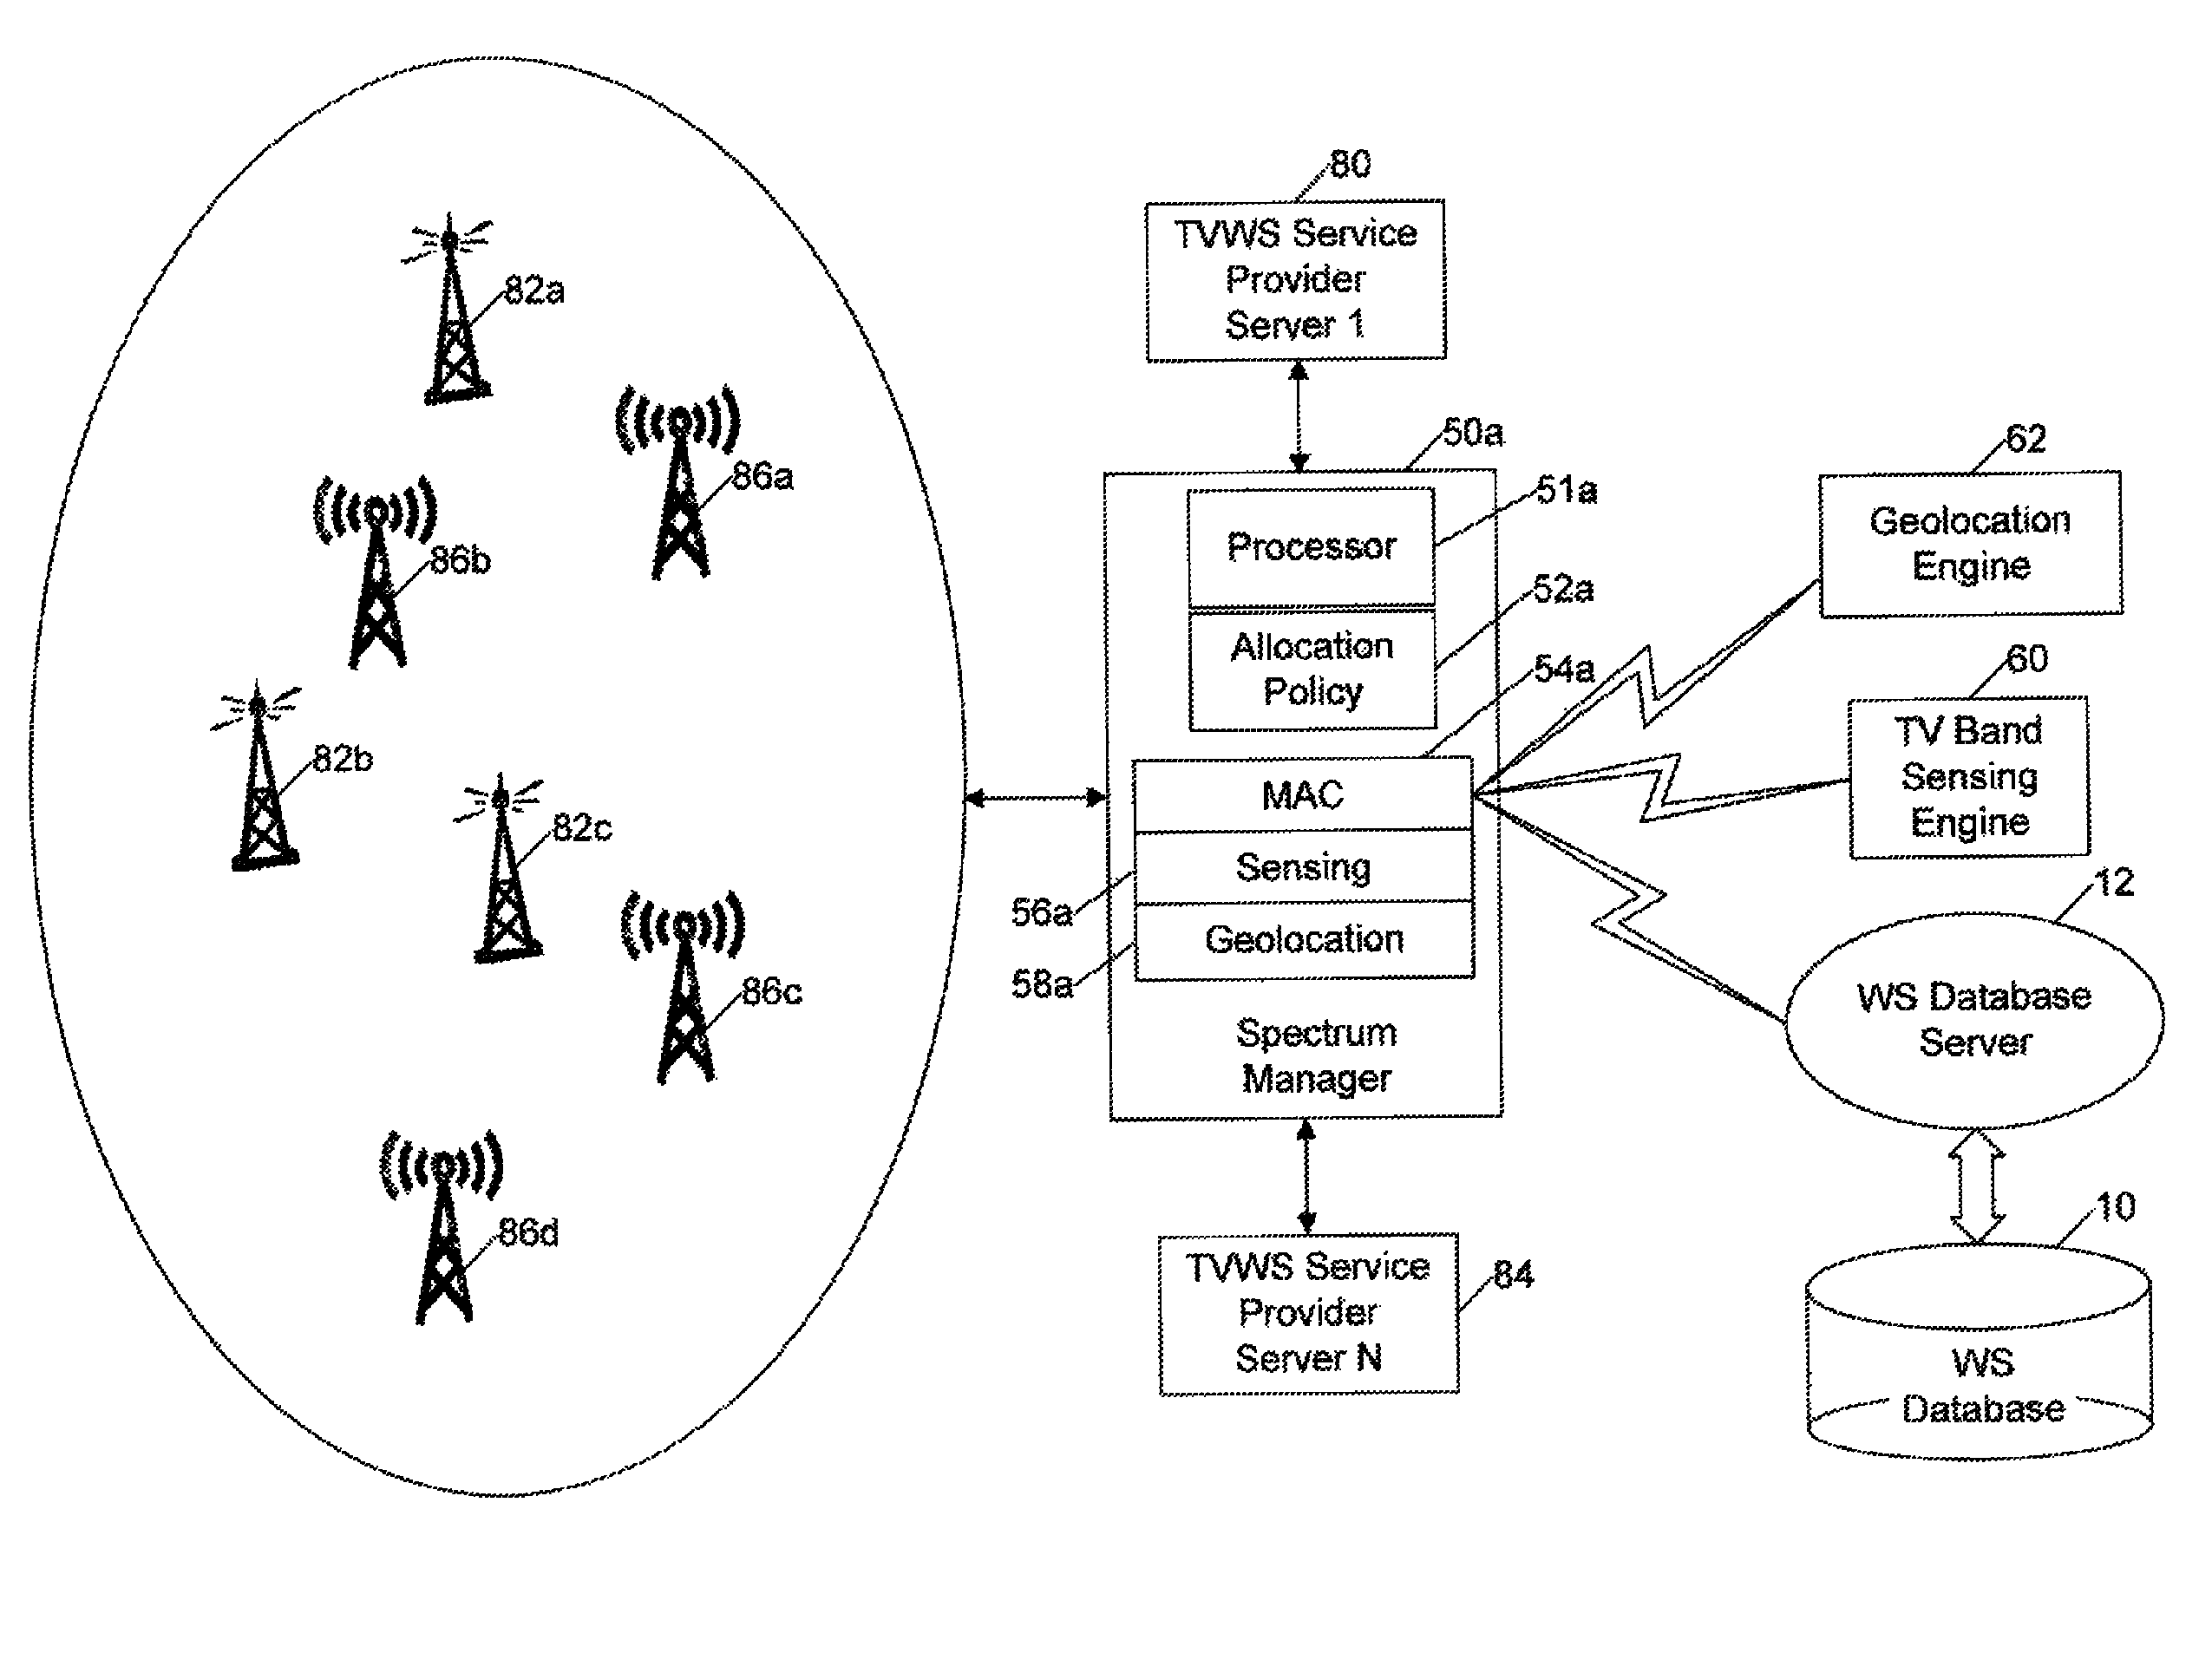 Peer-to-peer control network for a wireless radio access network